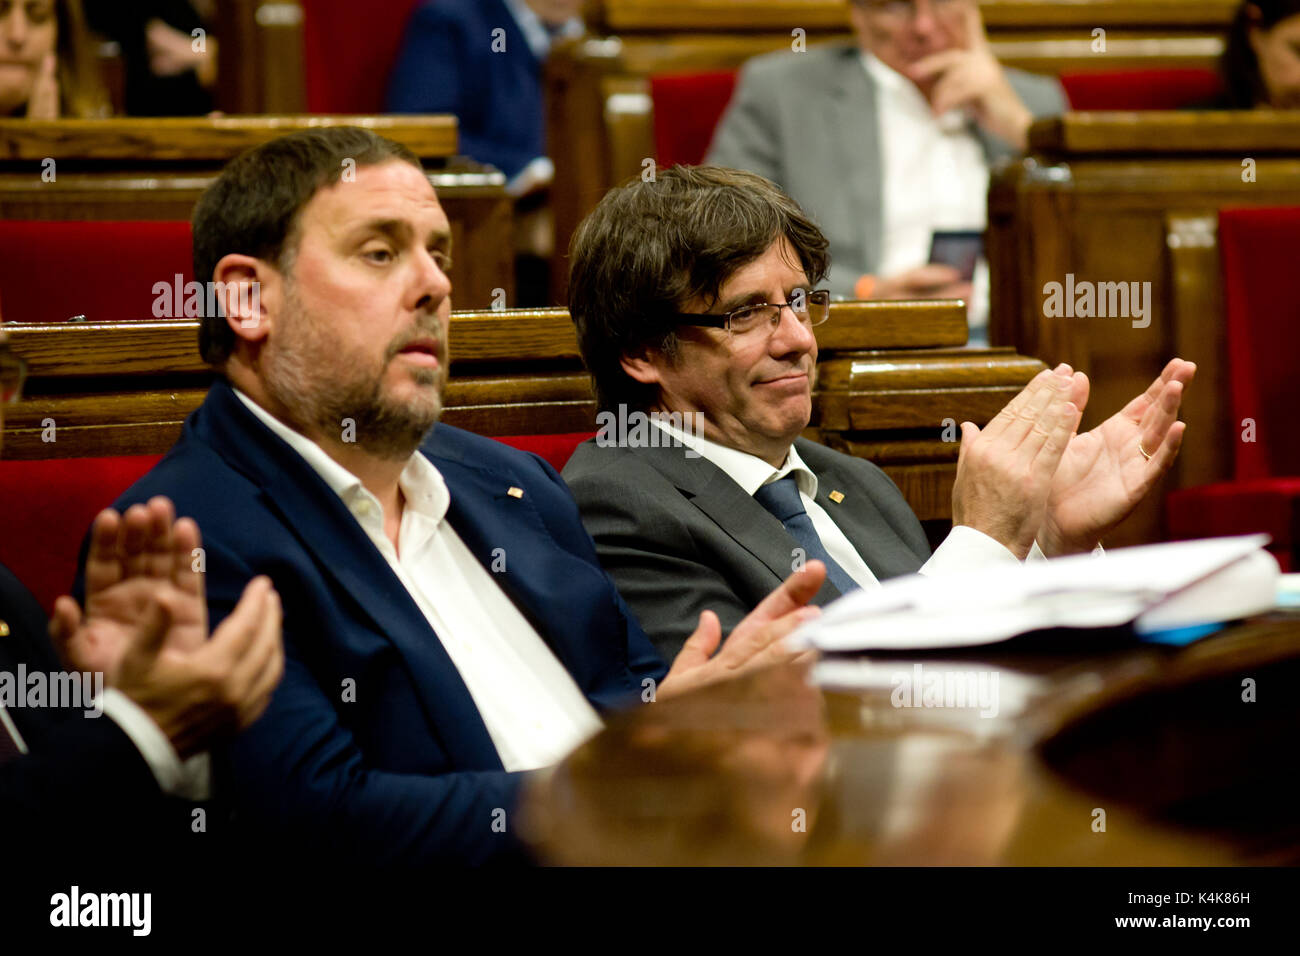 Barcelona, Catalonia, Spain. 6th Sep, 2017. Catalan regional president CARLES PUIGDEMONT (R) and catalan vice-president ORIOL JUNQUERAS (L) during the parliamentary session in the Catalonia Parliament. The Catalan Parliament has passed a law to call a referendum of independence the next first of October. The unionist forces of Catalonia and the Spanish government are frontally opposed to the referendum and consider it illegal. Credit: Jordi Boixareu/ZUMA Wire/Alamy Live News Stock Photo